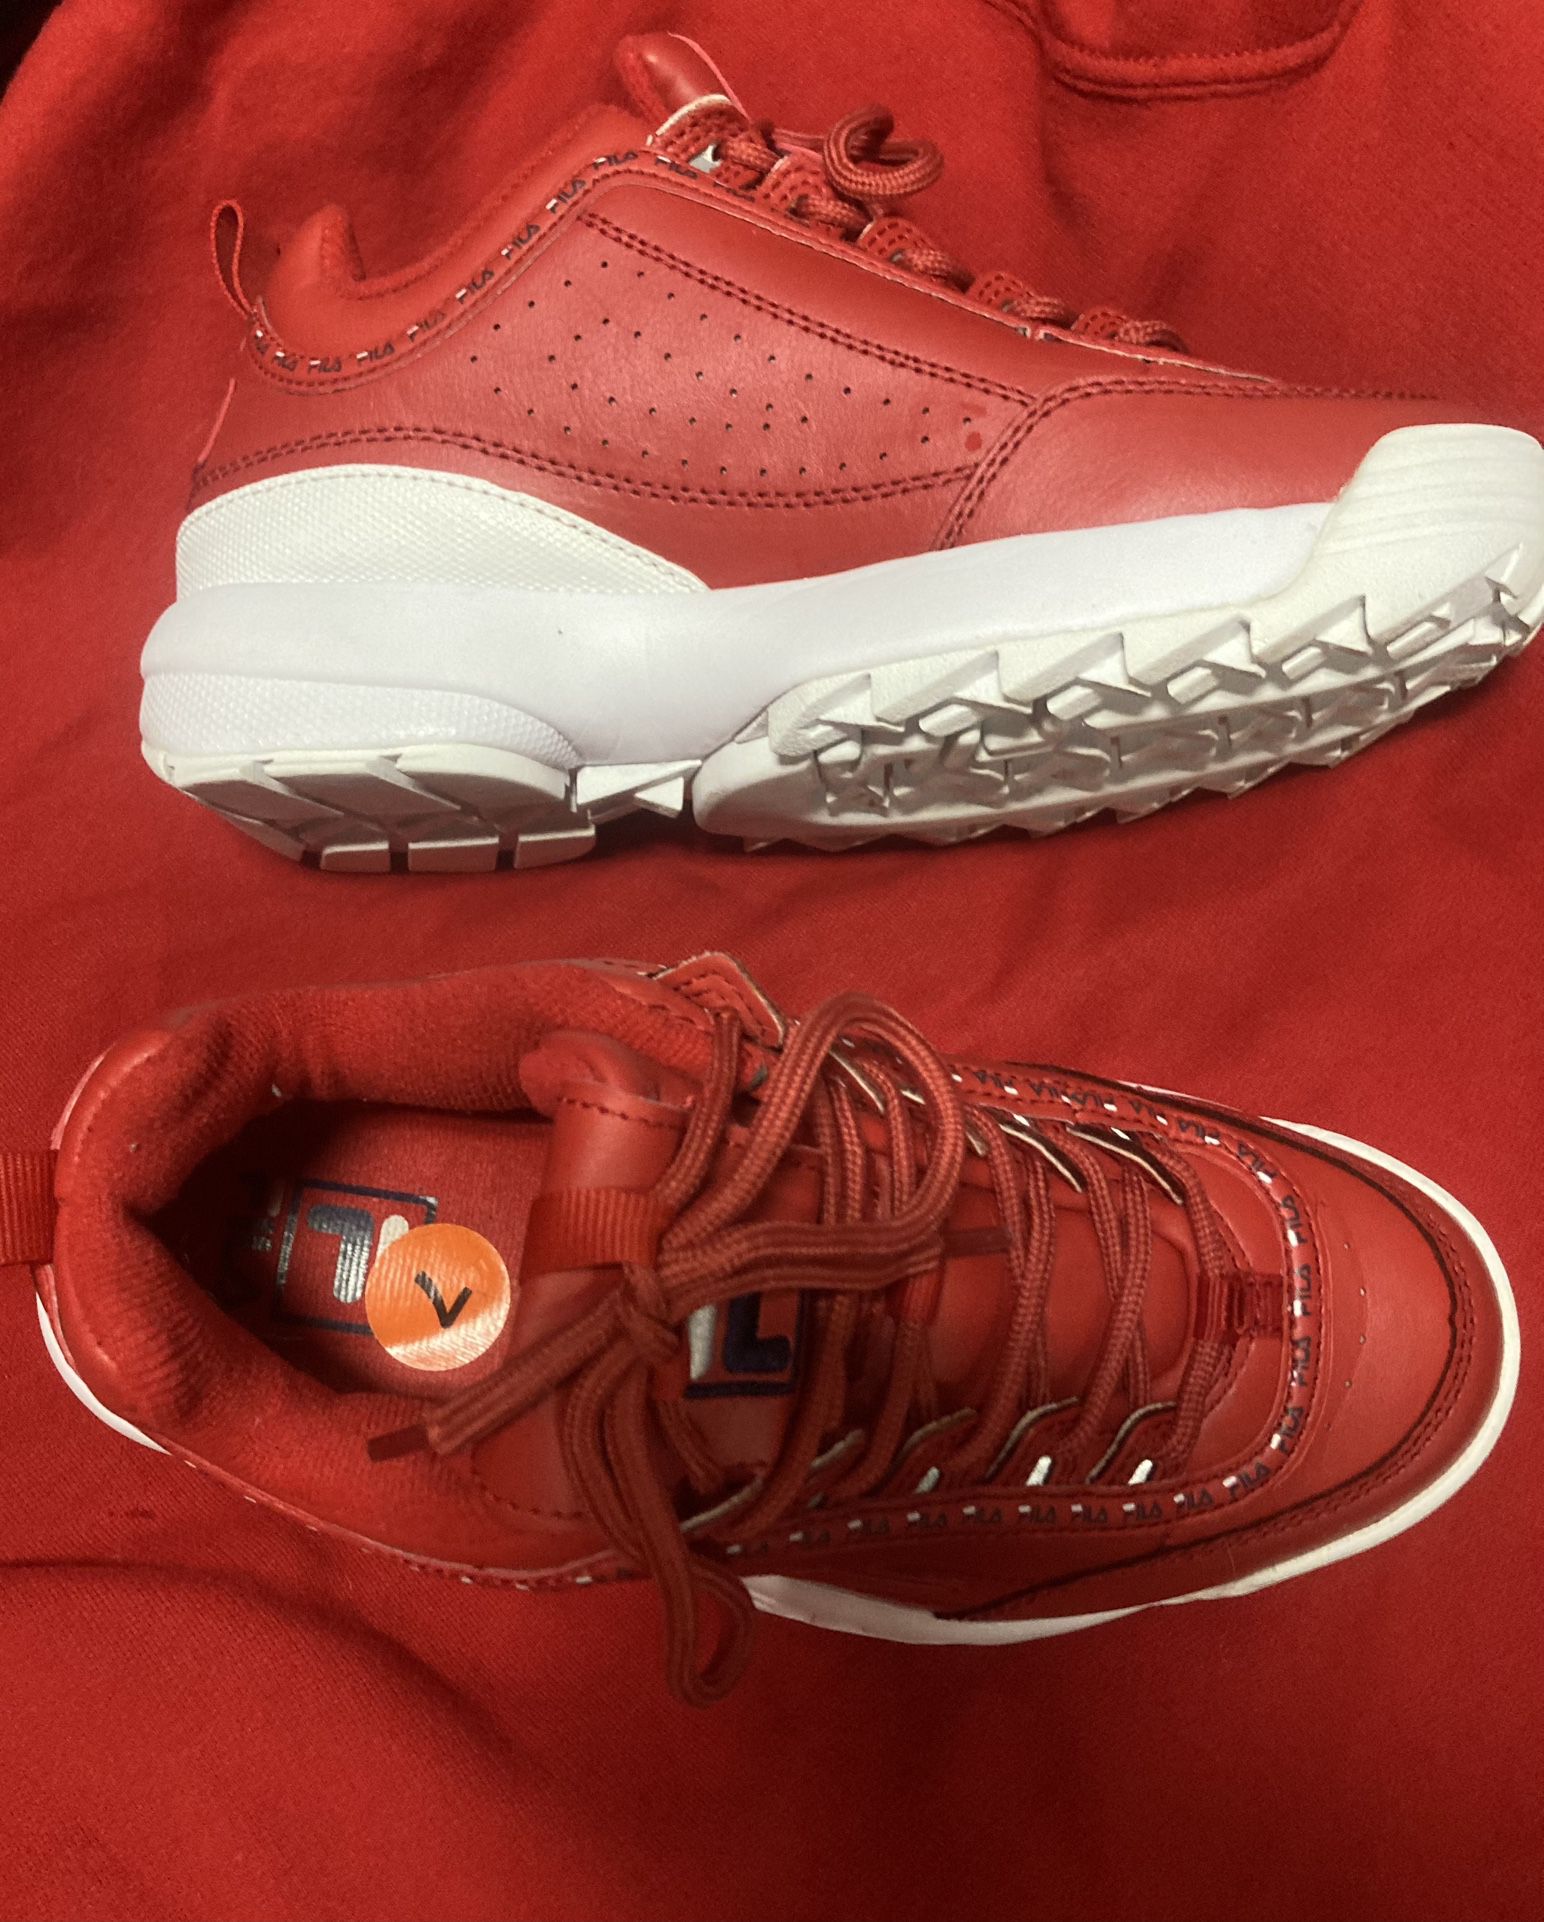 Fila II Sneakers Shoes Premium Red Leather Womens Sz for Sale New York, NY - OfferUp